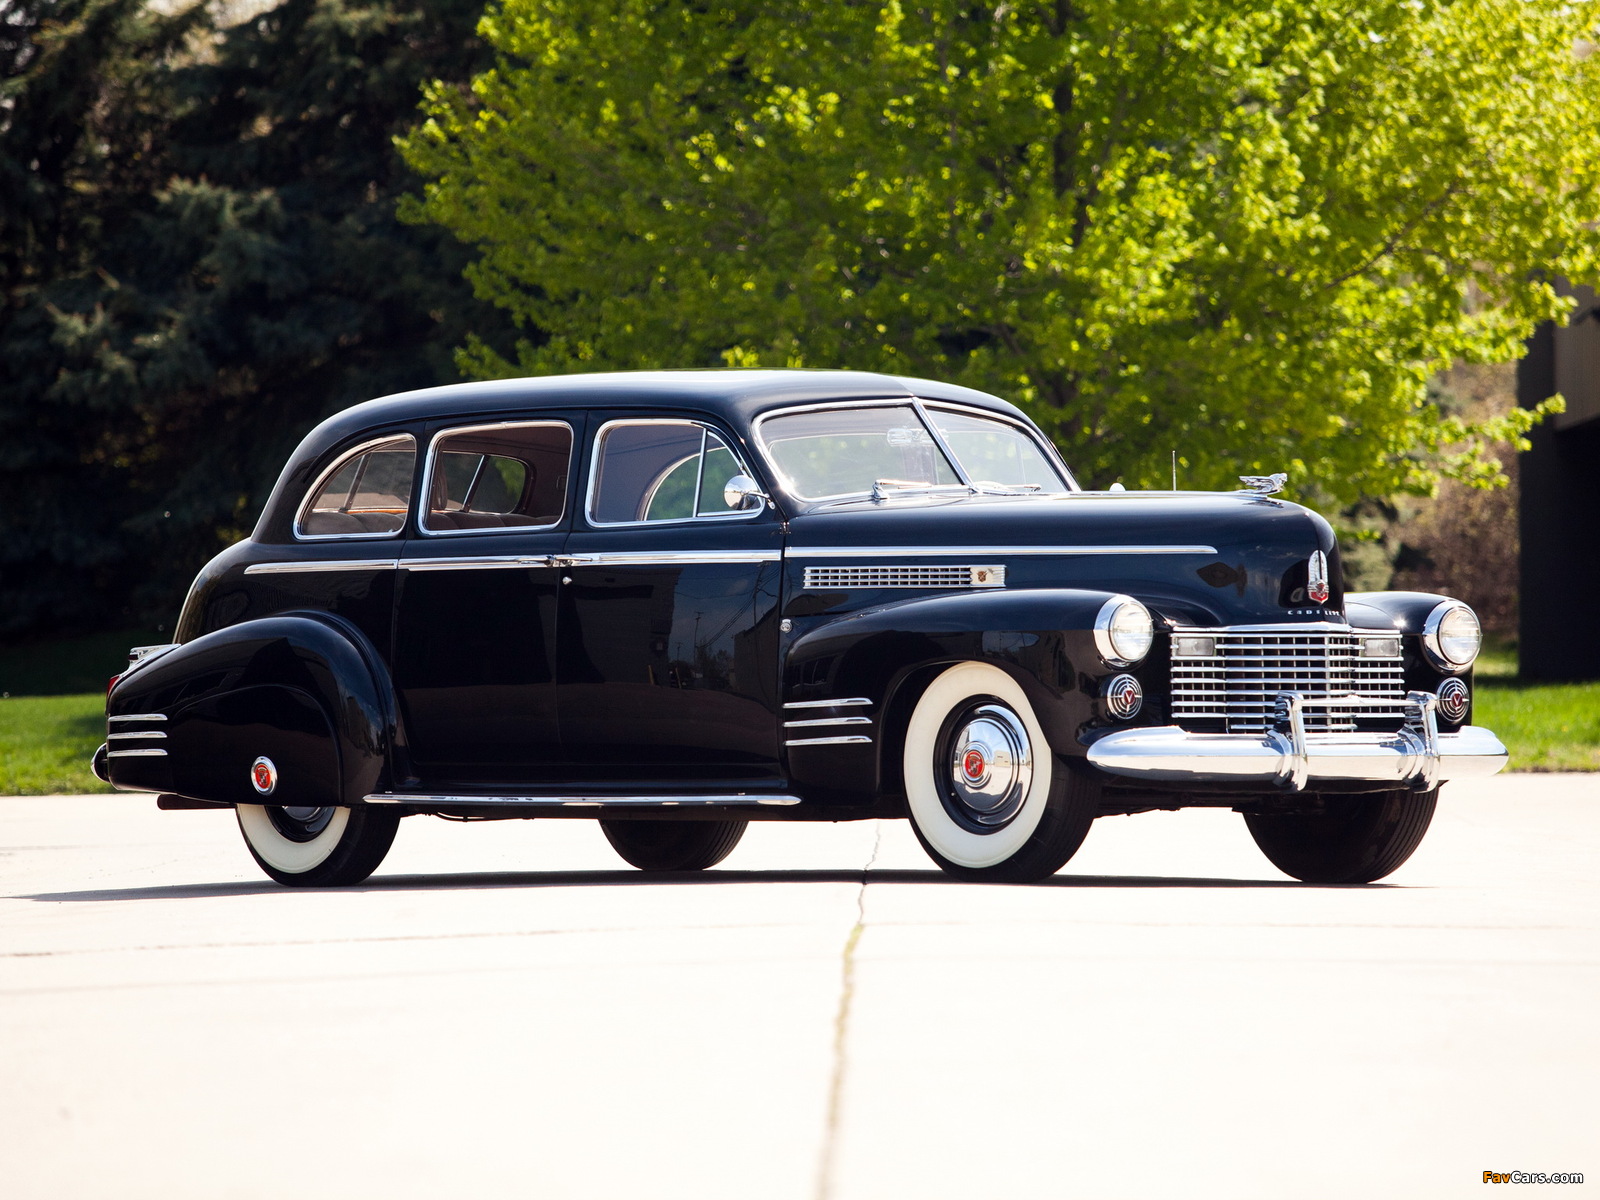 Pictures of Cadillac Fleetwood Seventy-Five Touring Sedan (41-7519) 1941 (1600 x 1200)